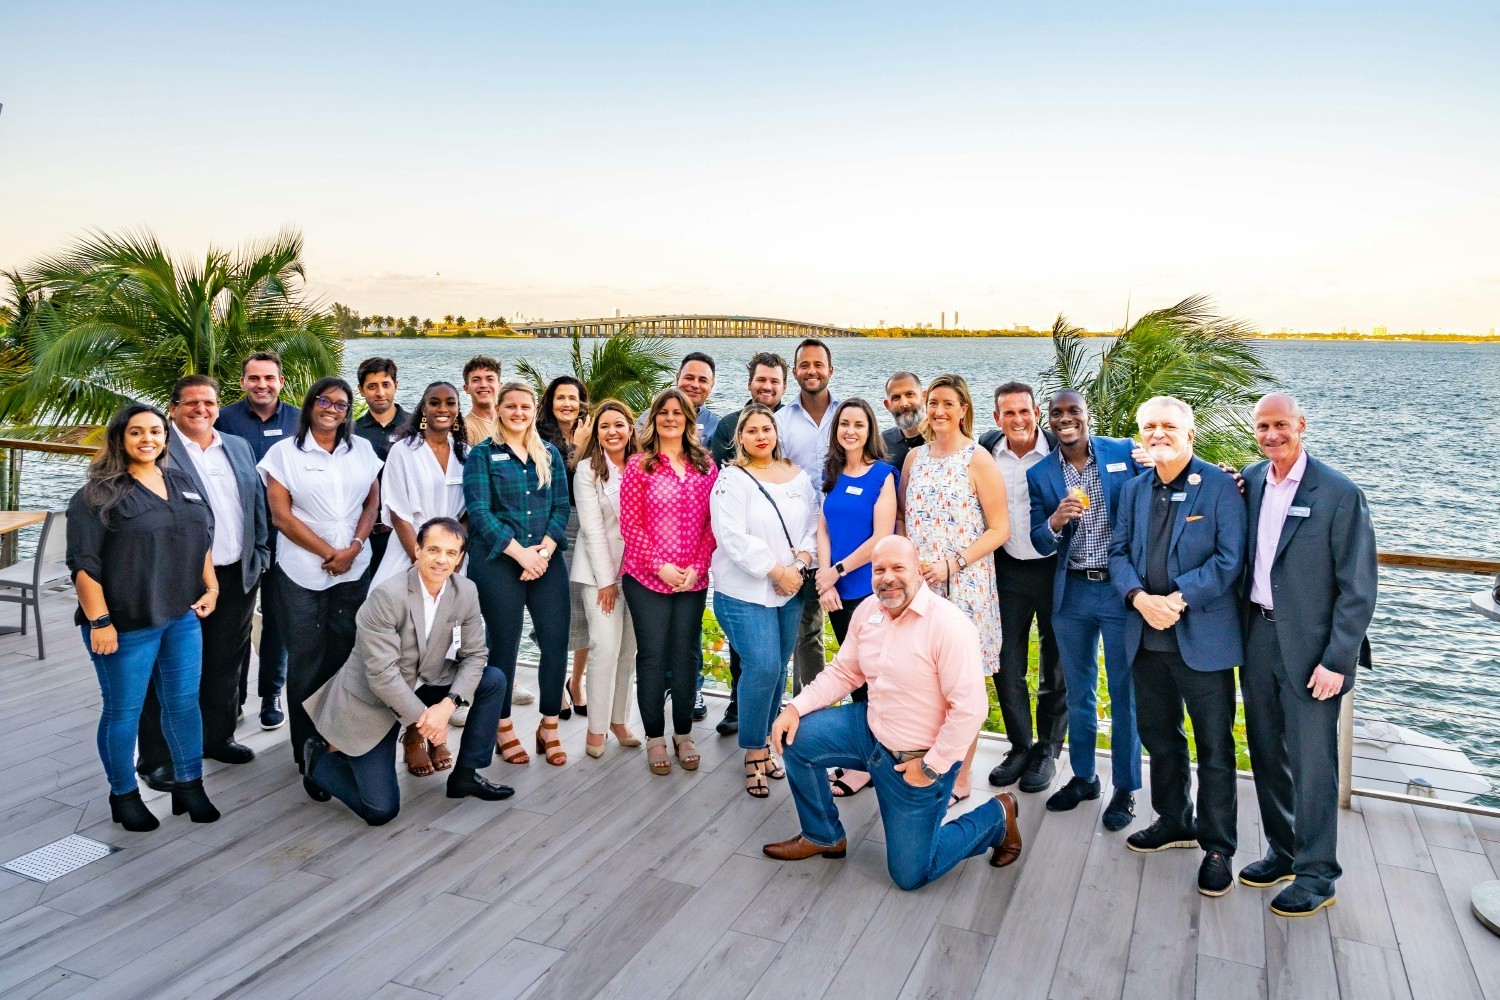 Lennar’s Advisory Council guides inclusion & diversity to attract and develop talent representative of where we operate